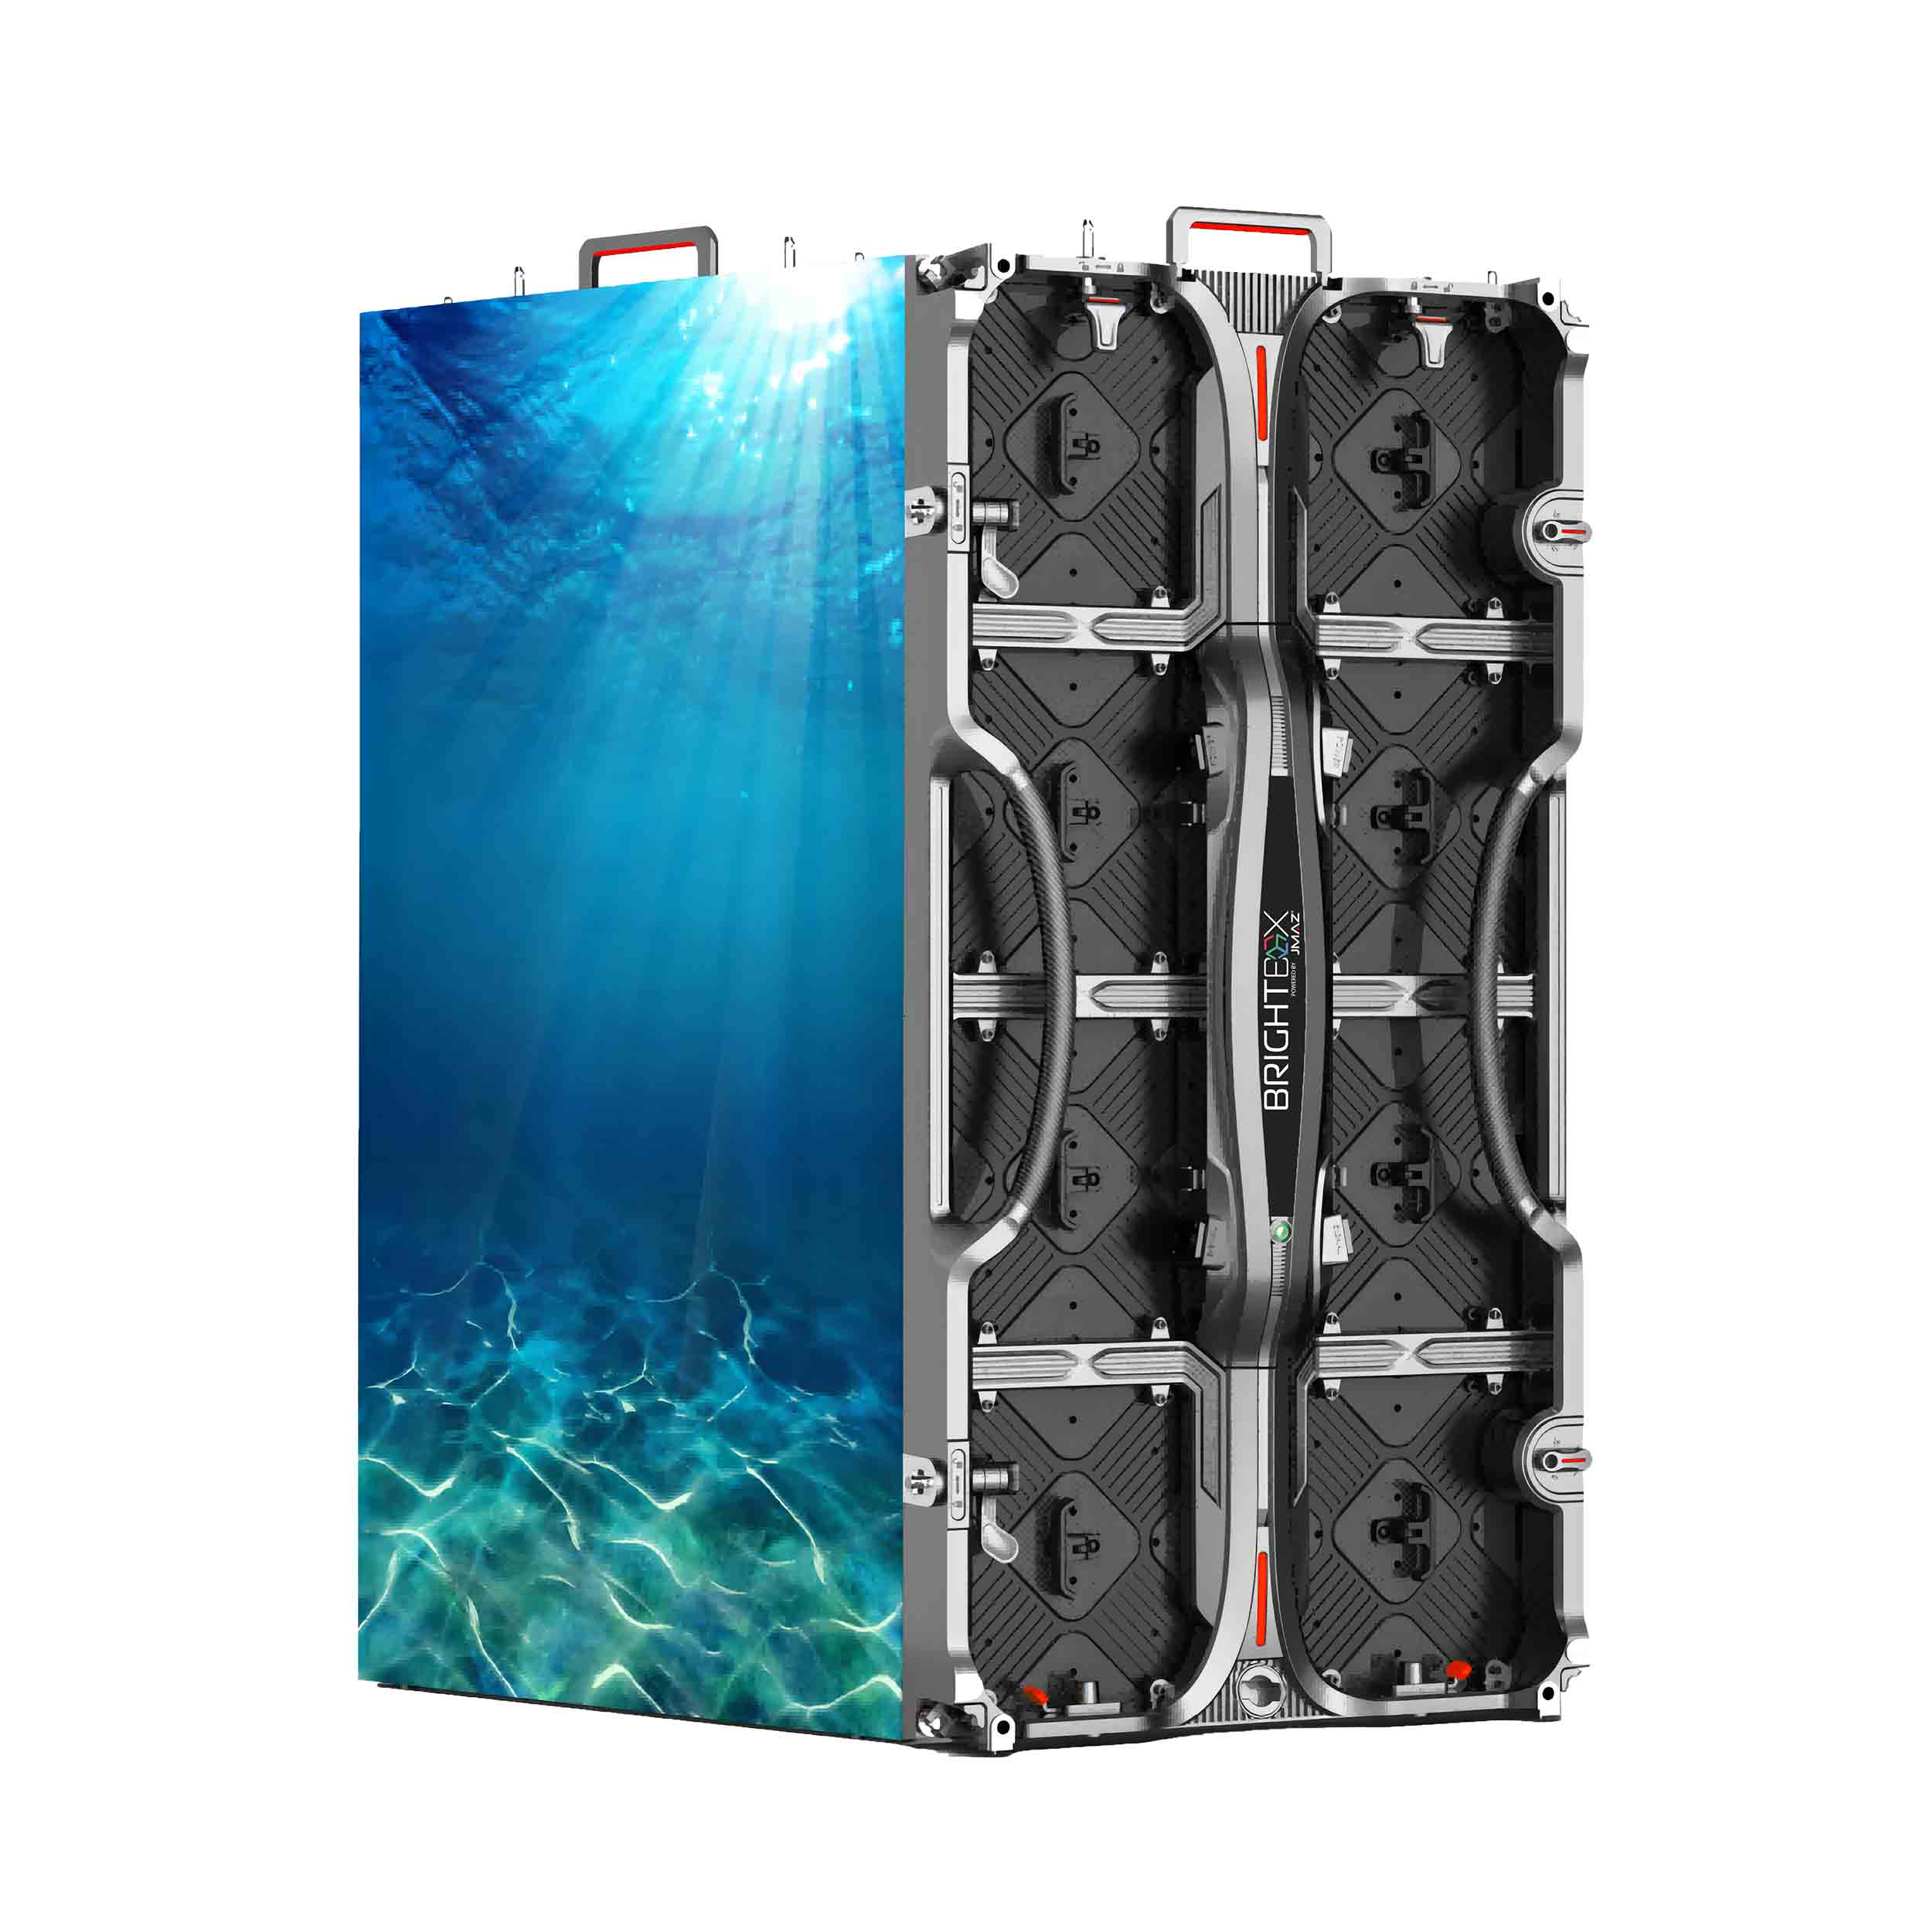 BrightBox Osiris Outdoor 3.9 LED Video Wall Panel - 500x1000 by BrightBox